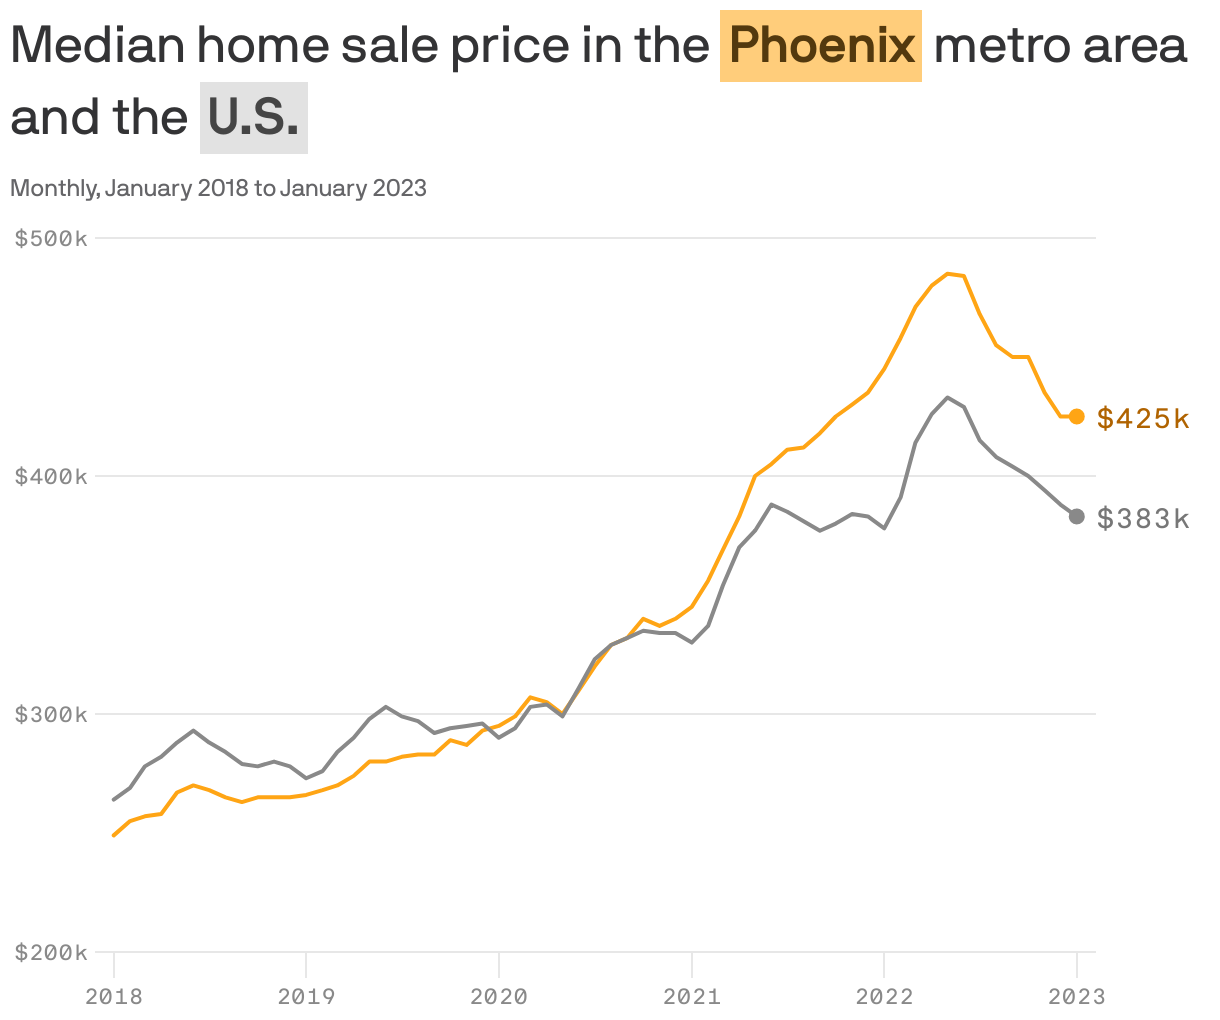 Median home sale price in the <b style='background-color: #FFCD7B; color: #53390E; display: inline-block; padding: 1px 4px; whitespace: no-wrap;'>Phoenix</b> metro area and the <b style='background-color: #E2E2E2; color: #454545; display: inline-block; padding: 1px 4px; whitespace: no-wrap;'>U.S.</b>